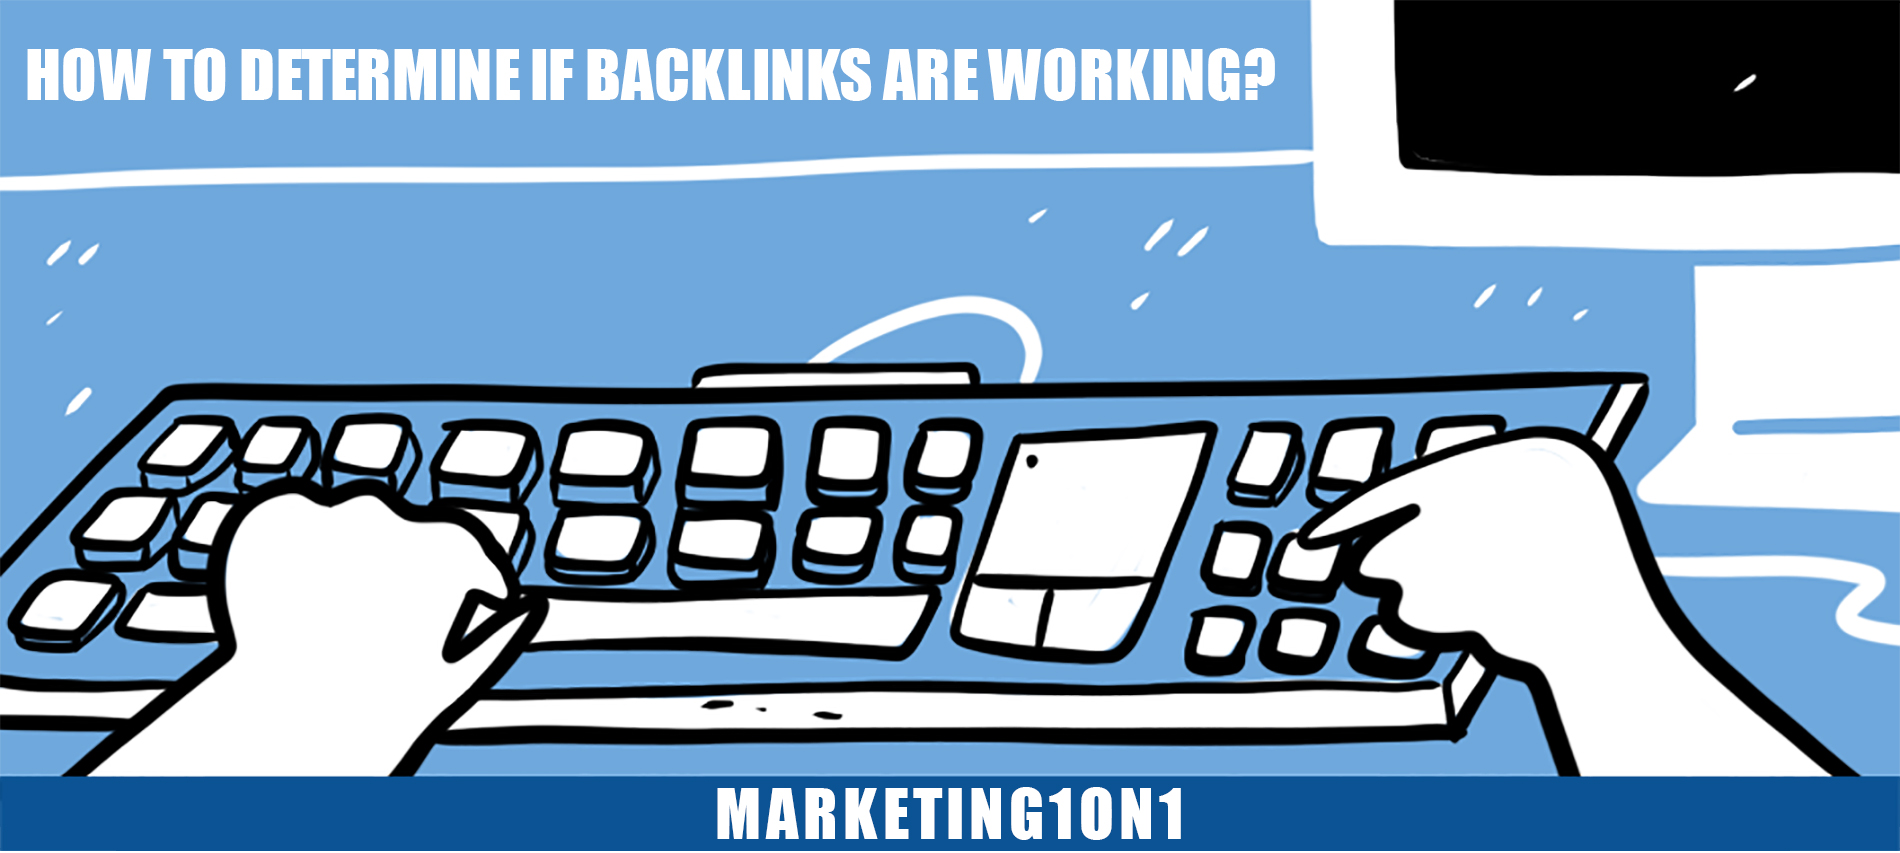 How to determine if backlinks are working?